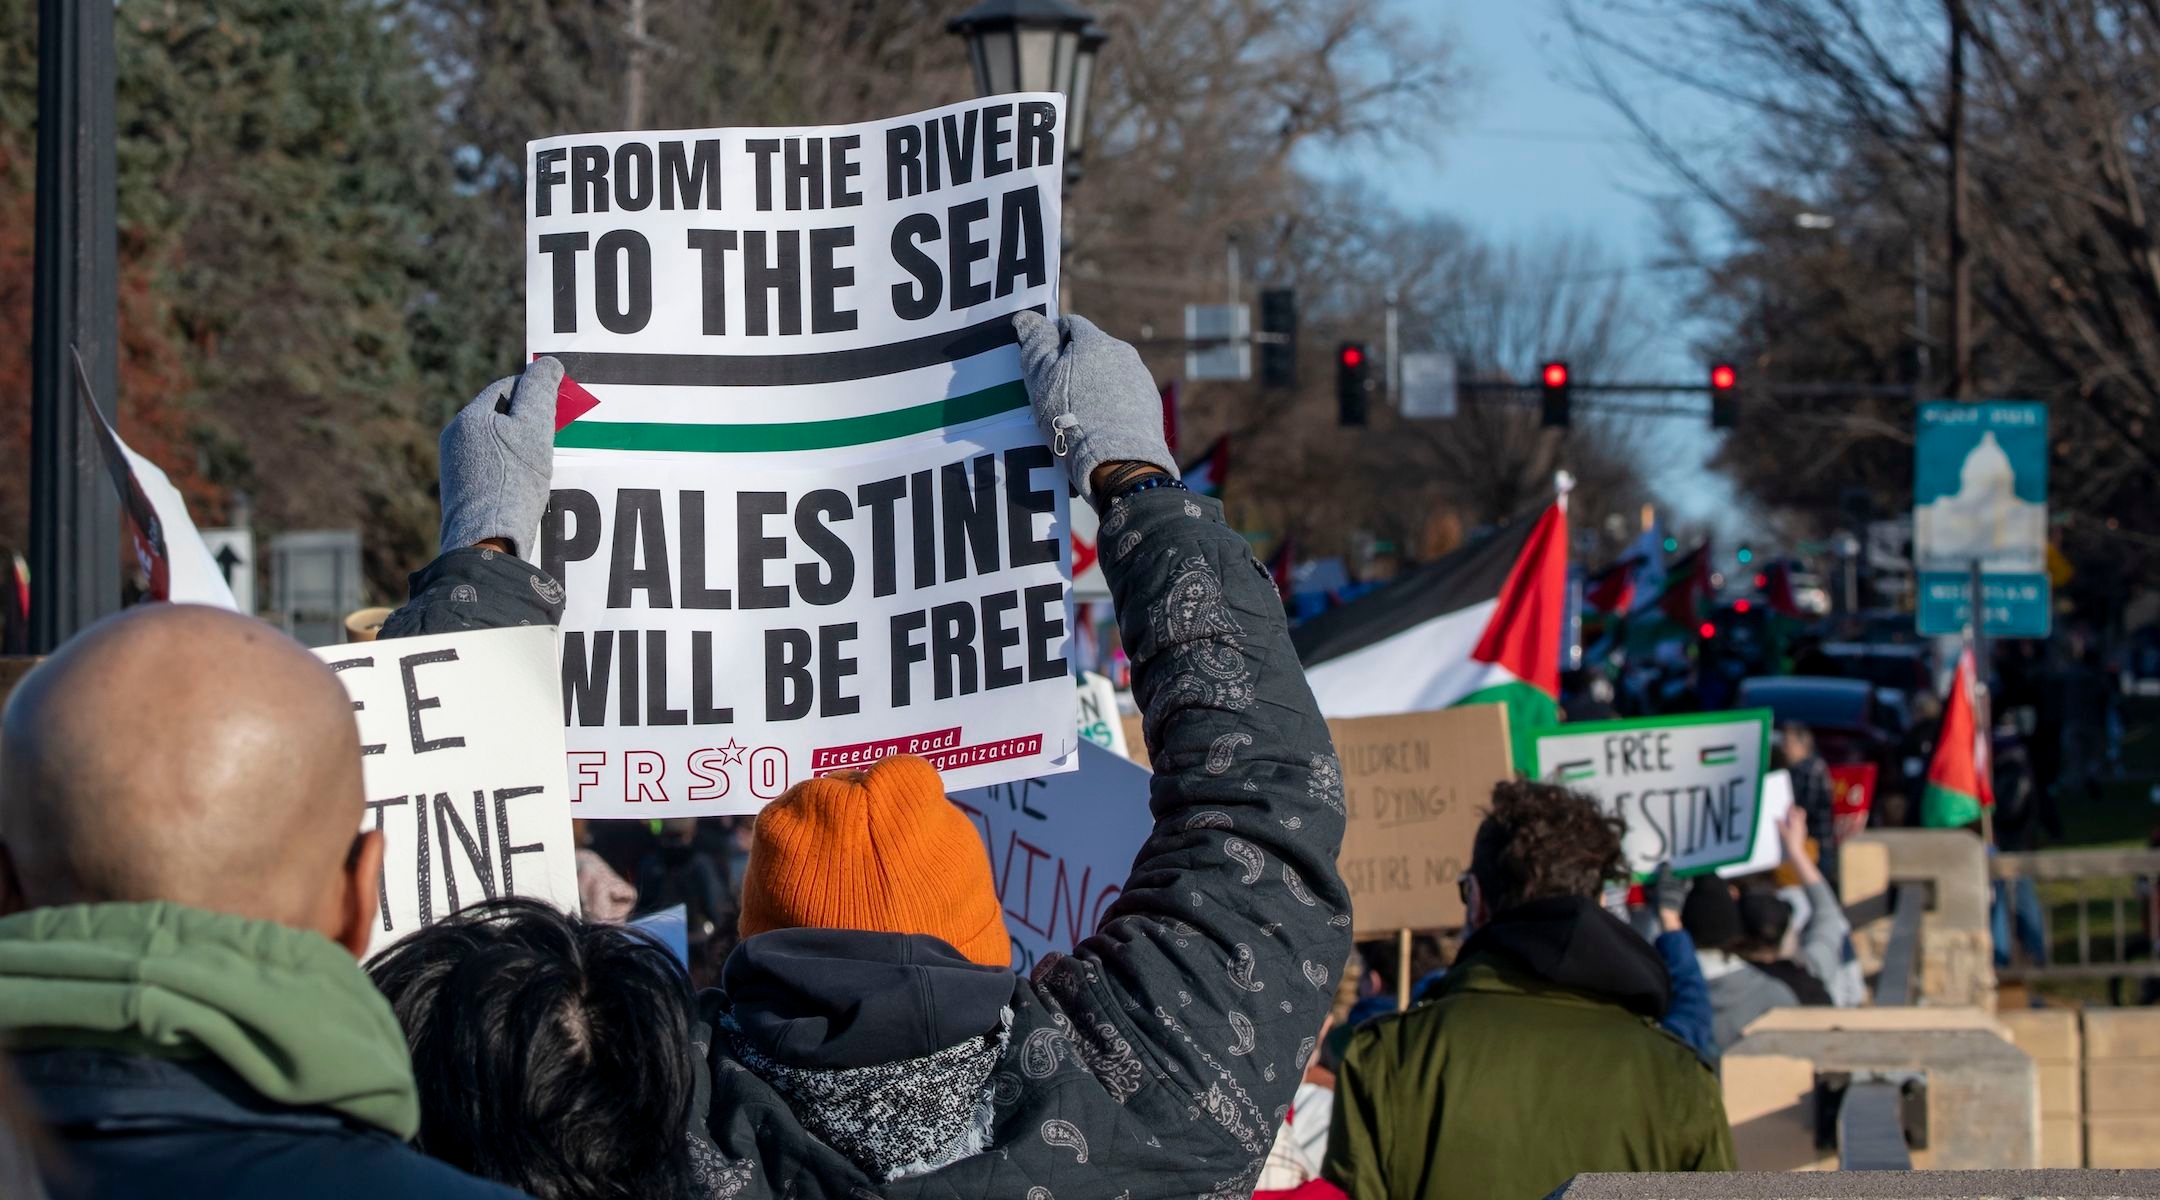 Protesters at a pro-Palestinian rally in St. Paul, Minnesota, push the state to divest from Israel in the wake of the war in Gaza, Nov. 19, 2023. (Michael Siluk/UCG/Universal Images Group via Getty Images)